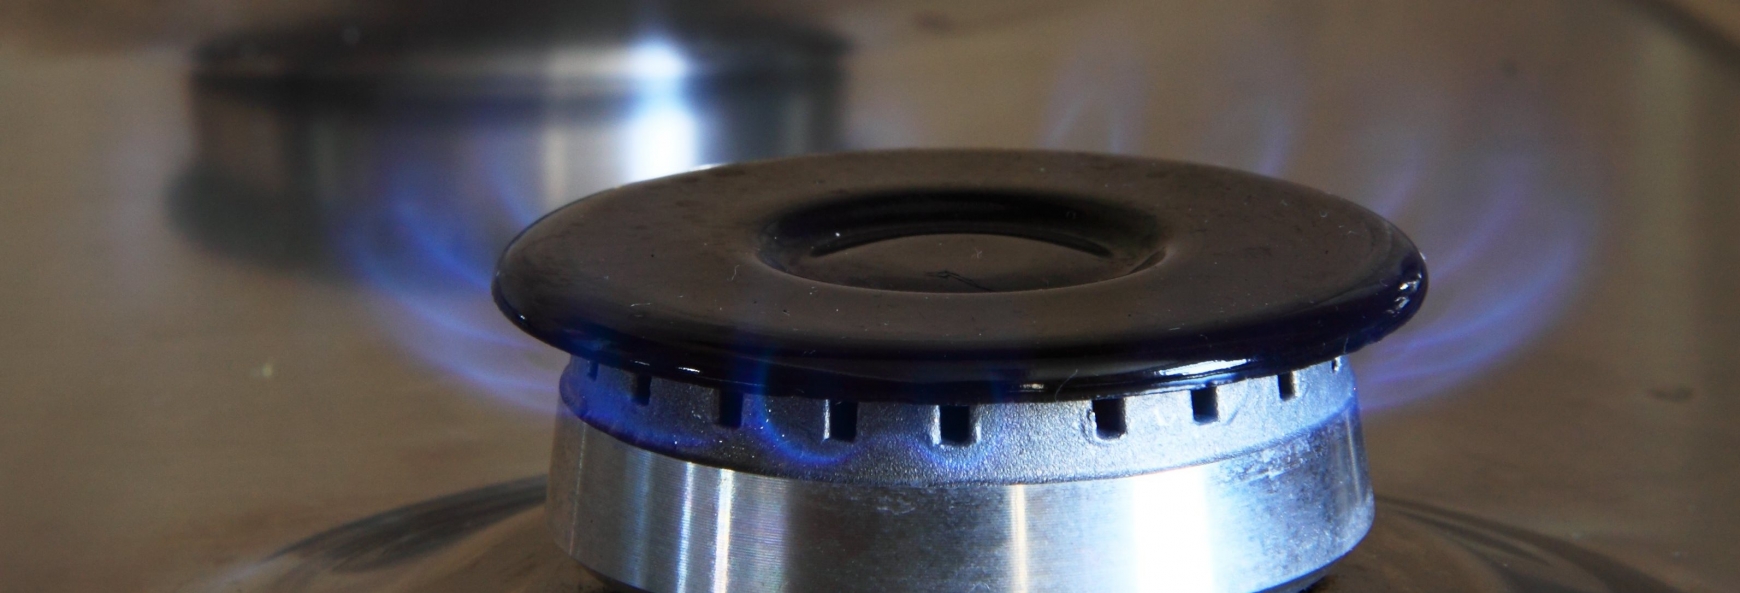 Gas flames on a gas hob ring